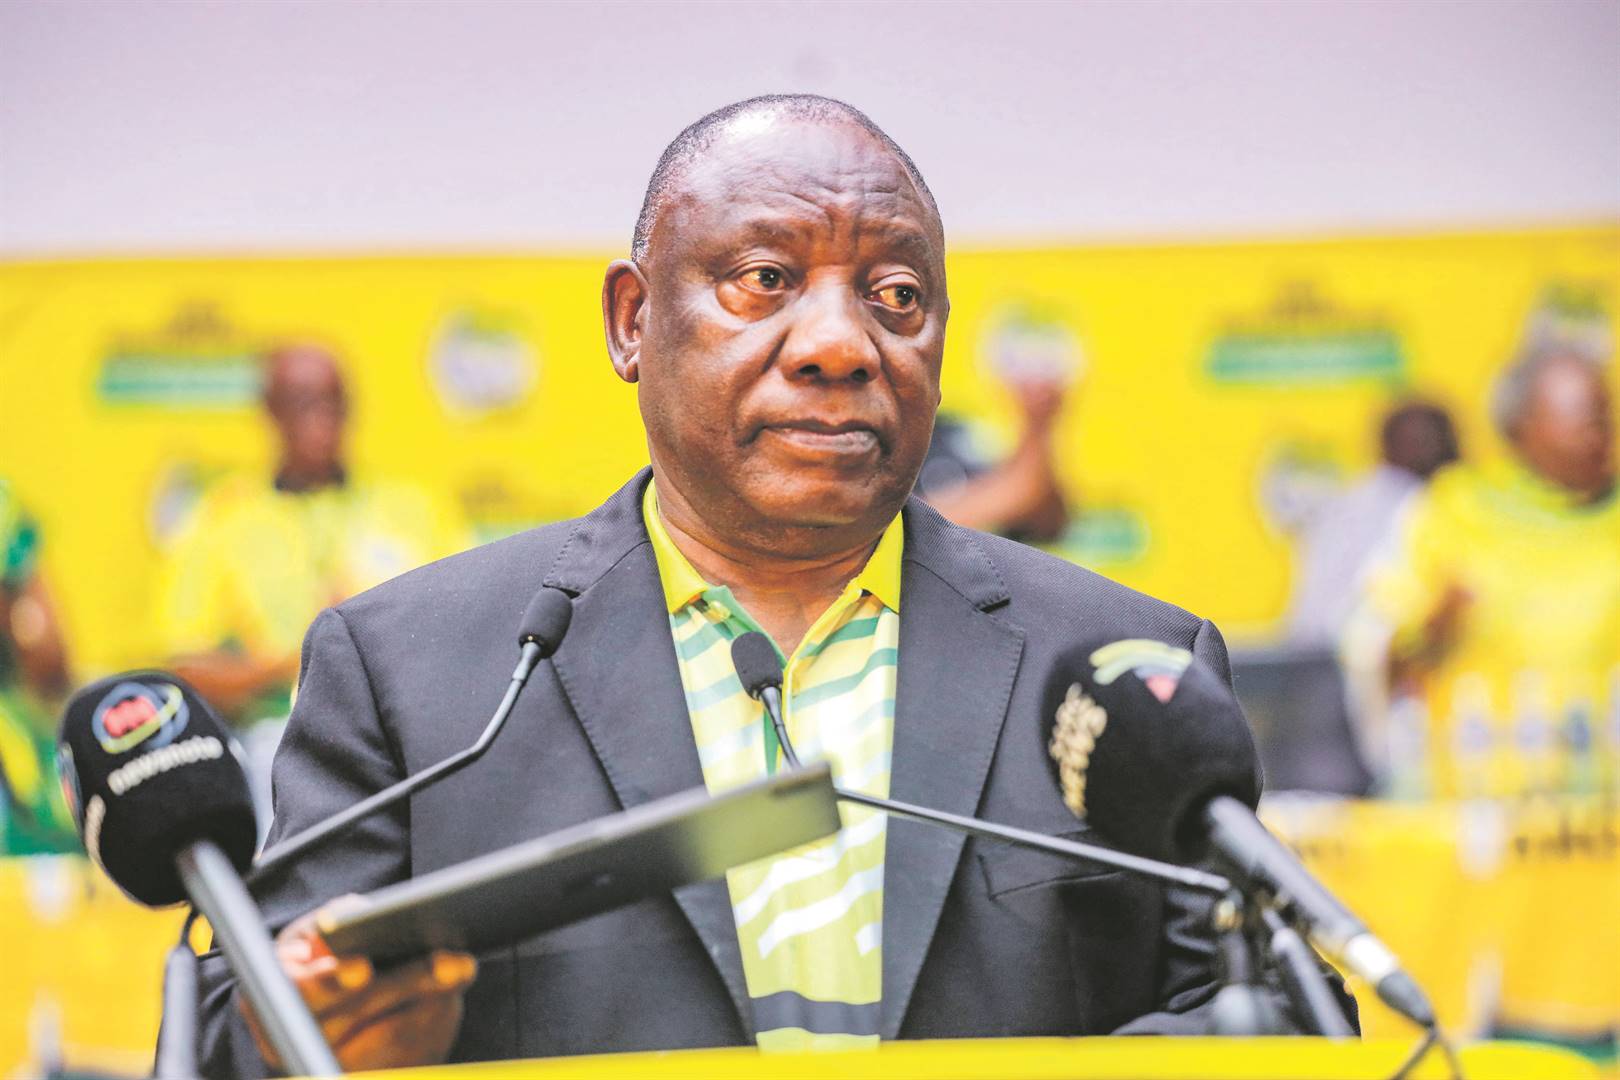 President Cyril RamaphosA, who was called to intervene. Photo Gallo Images